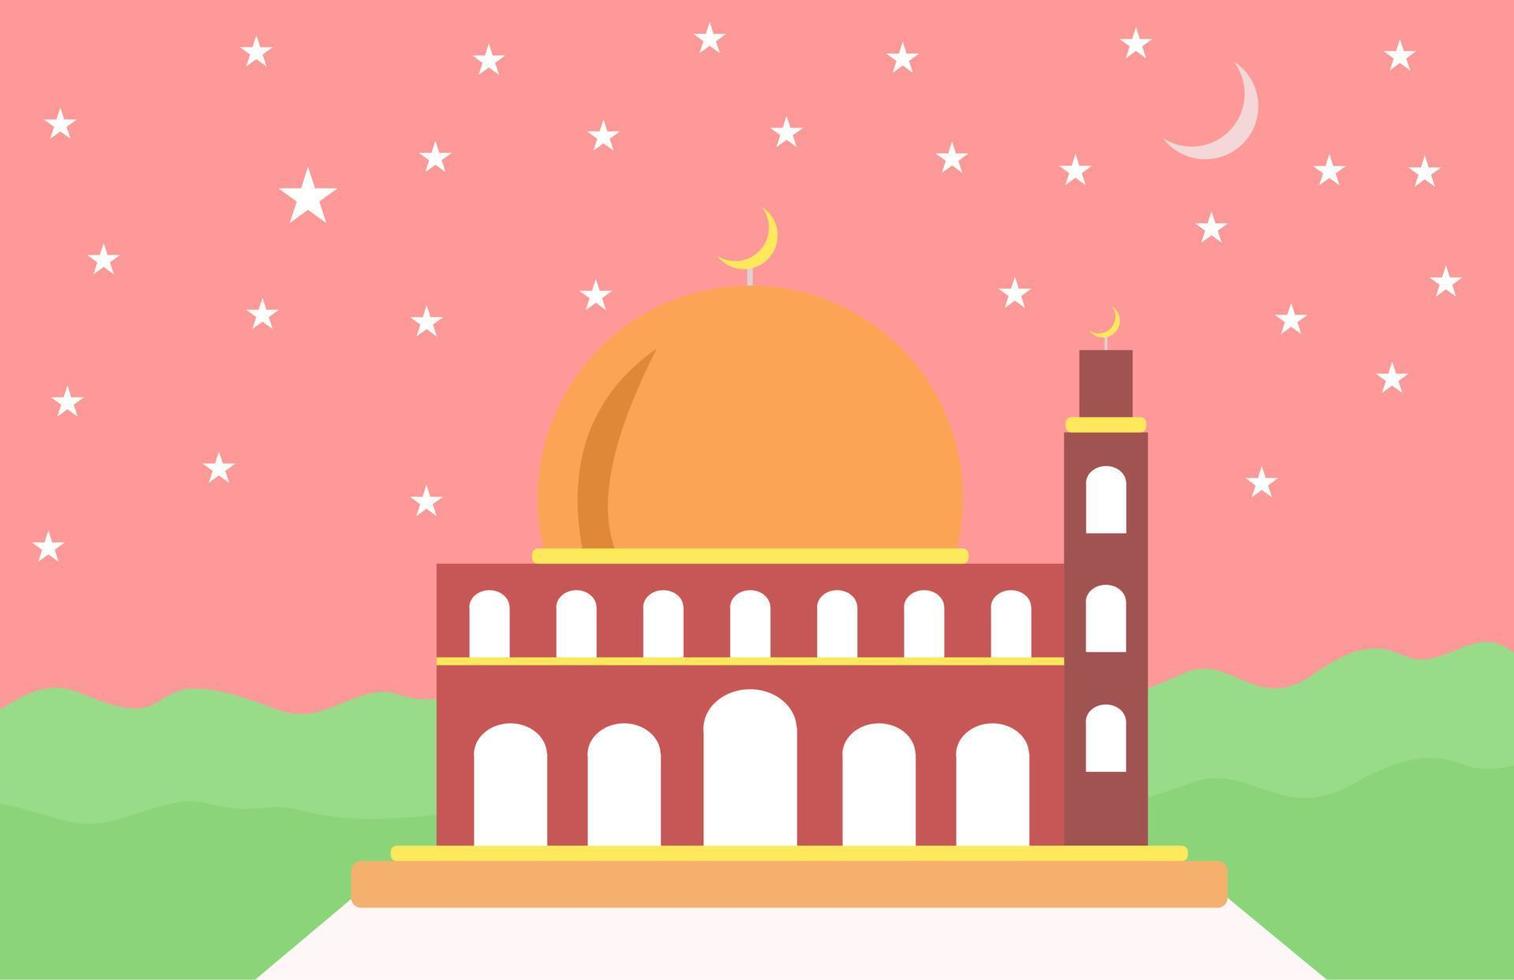 Mosque night image, with moon and stars. vector illustration on a pink background for ramadan theme